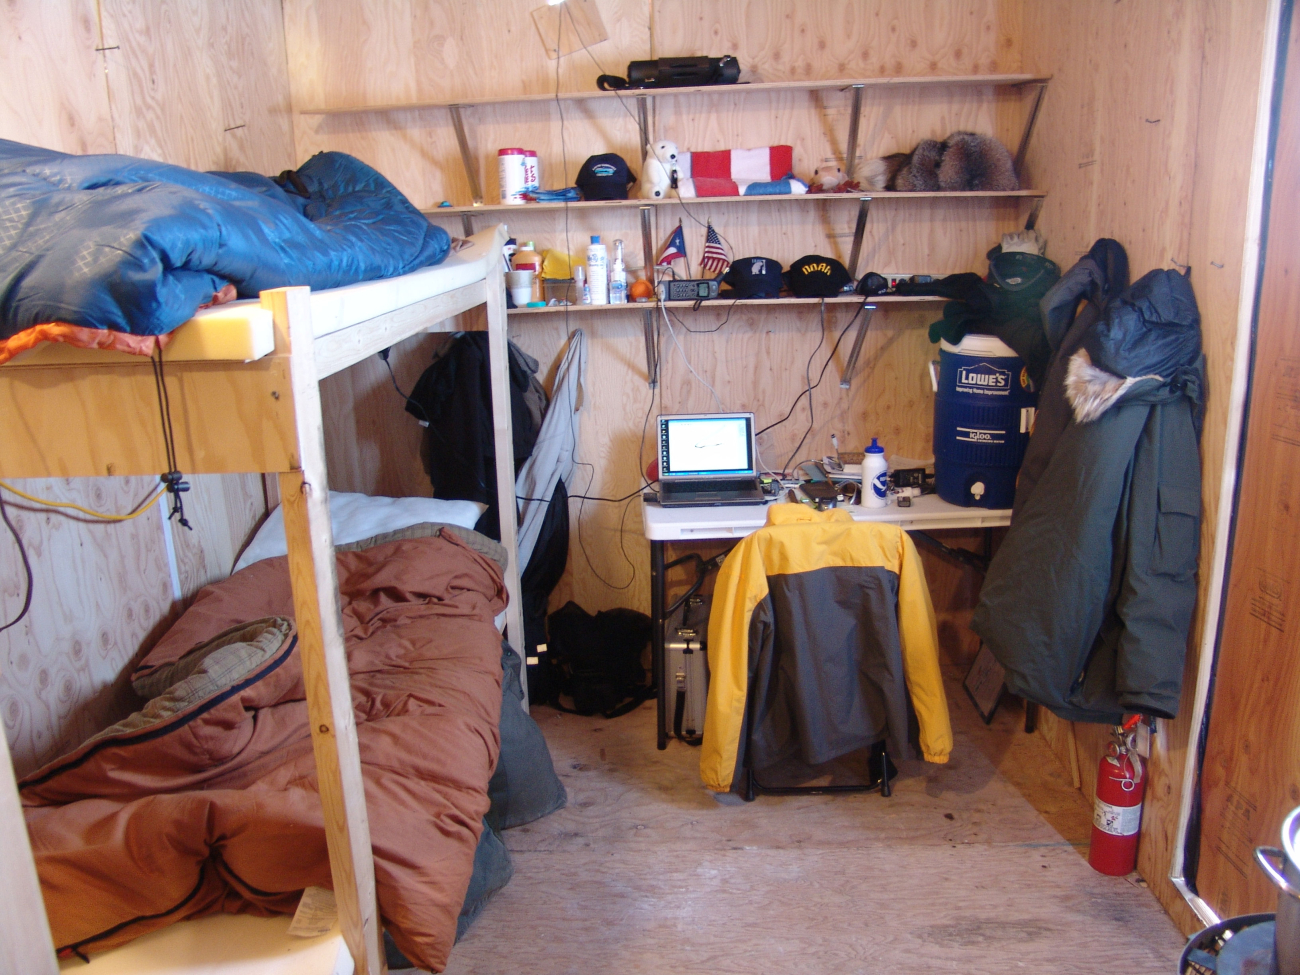 Living quarters at ice camp